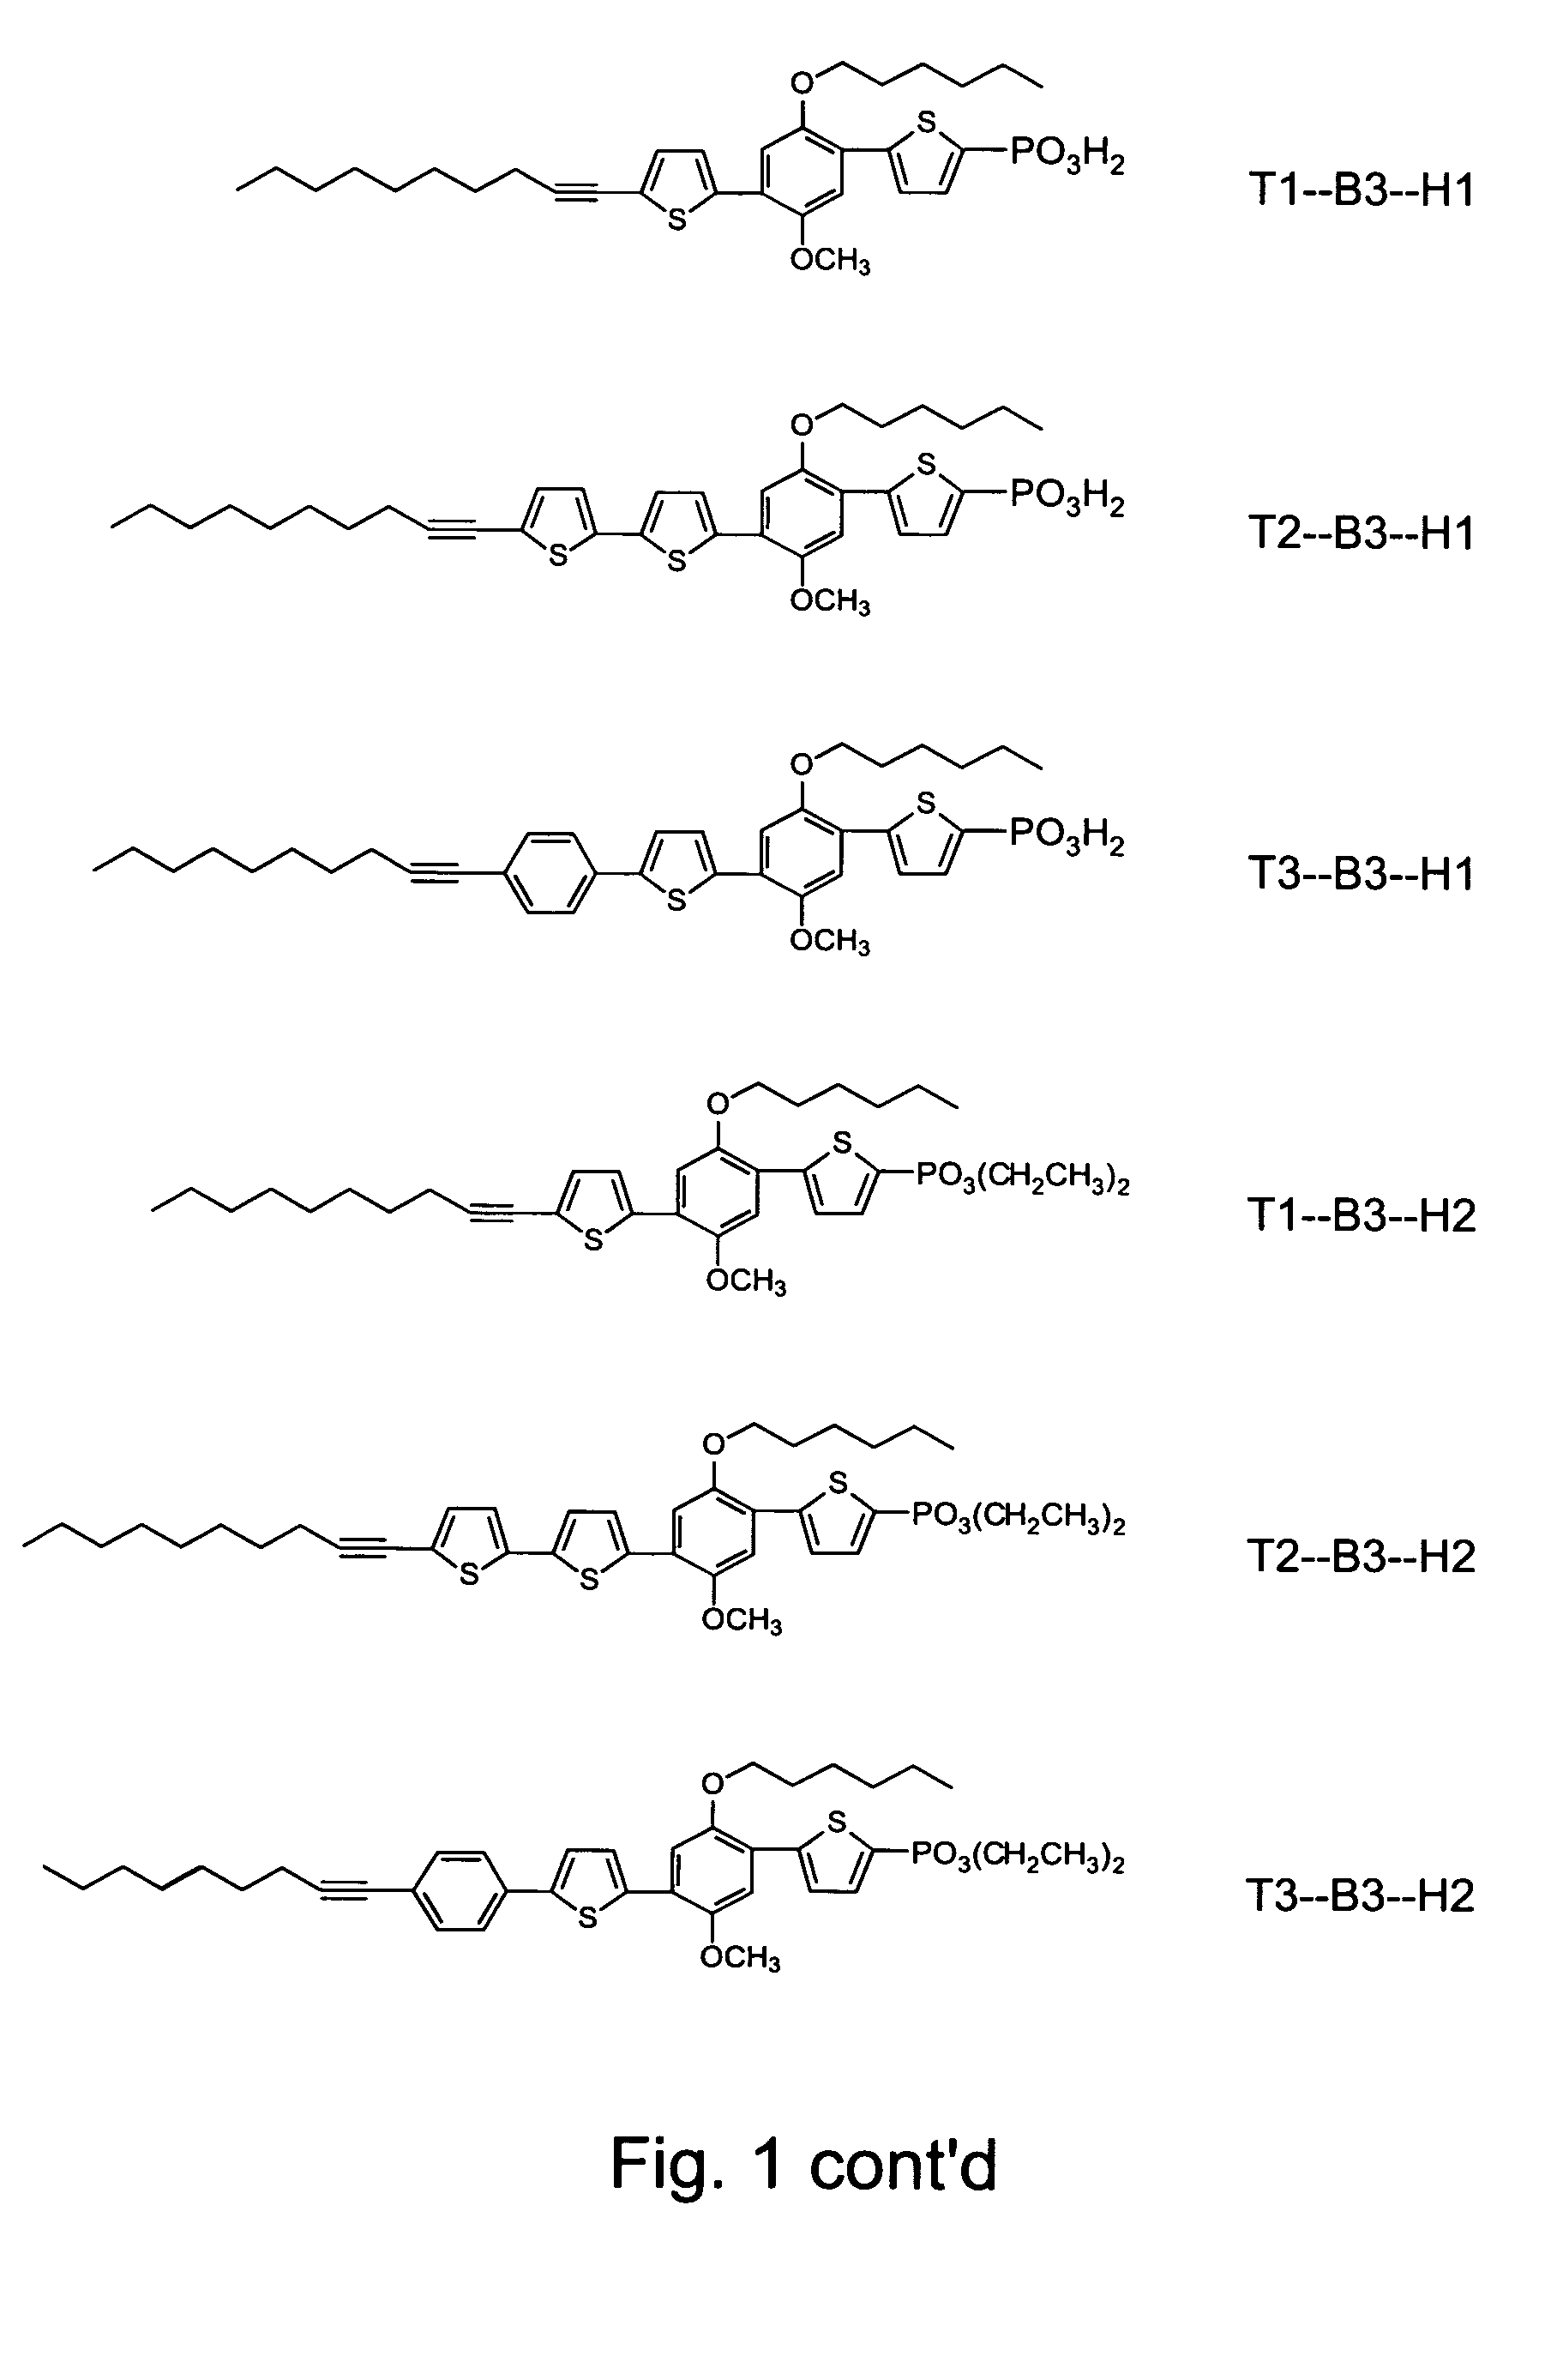 Organic species that facilitate charge transfer to or from nanostructures